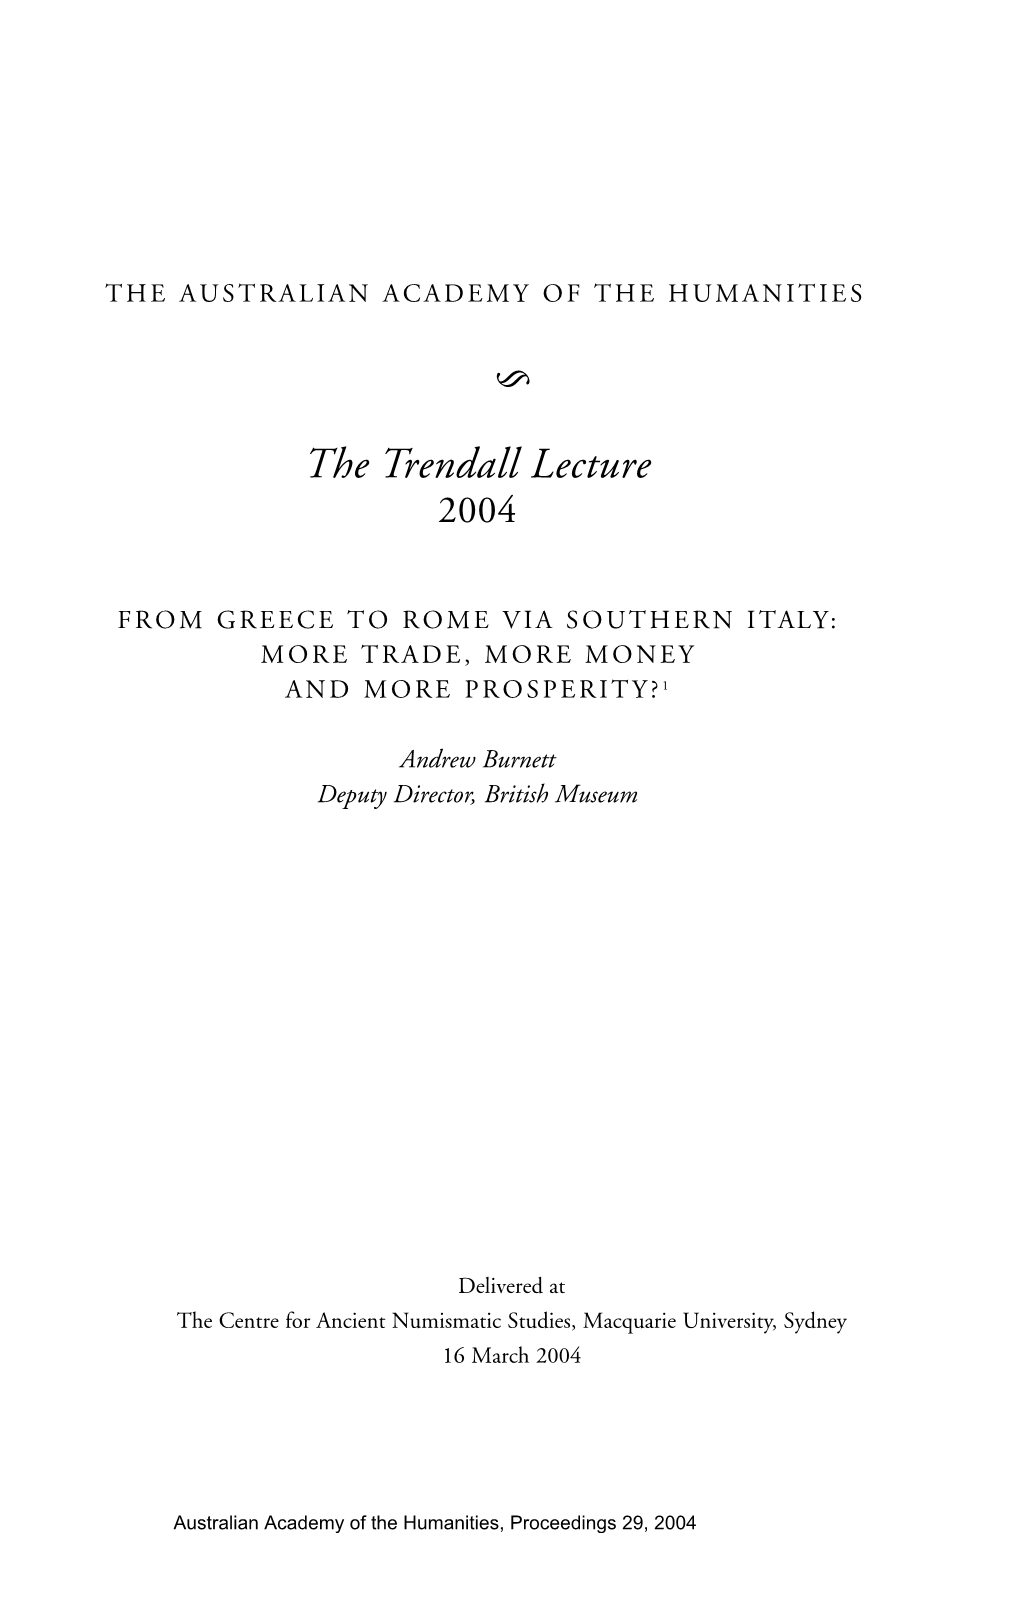 From Greece to Rome Via Southern Italy (PDF, 597KB)